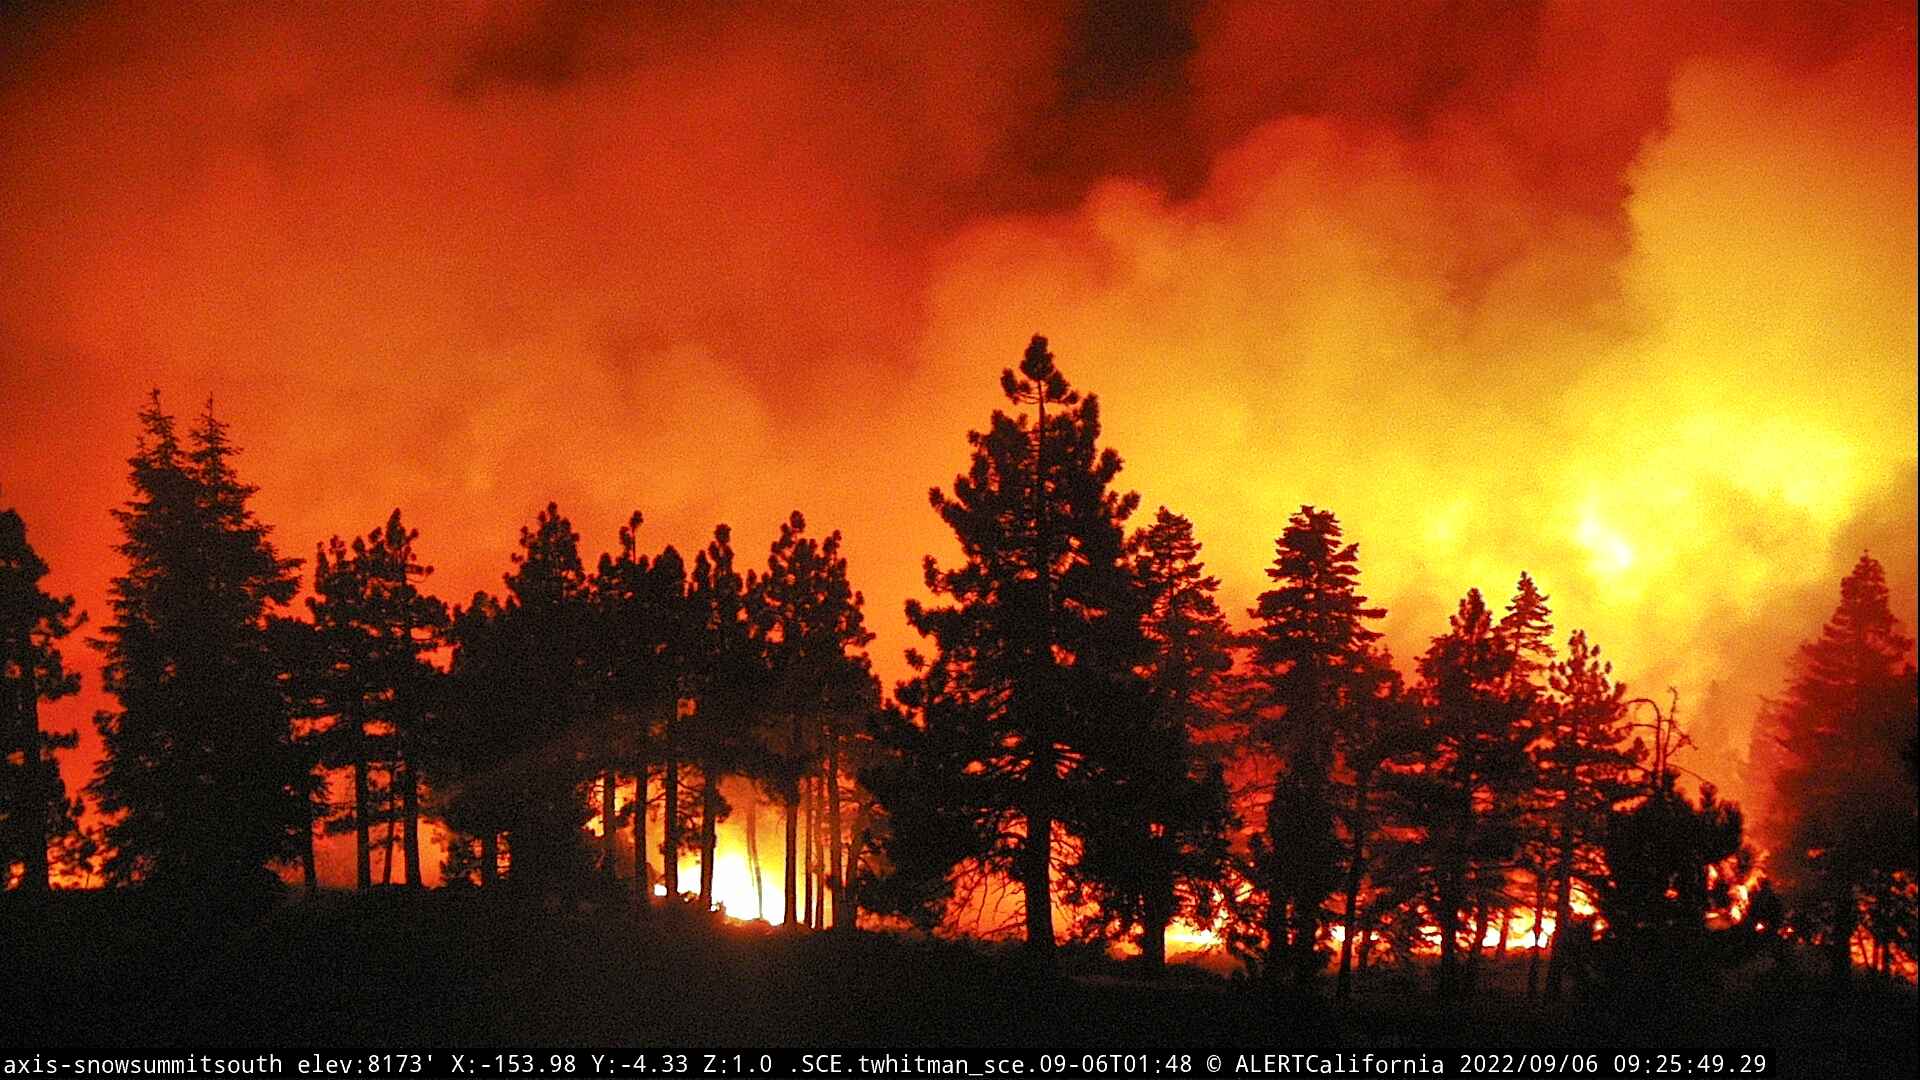 An ALERTCalifornia camera captures the image of a wildfire glowing red and orange silhouetting conifer trees dramatically in black.